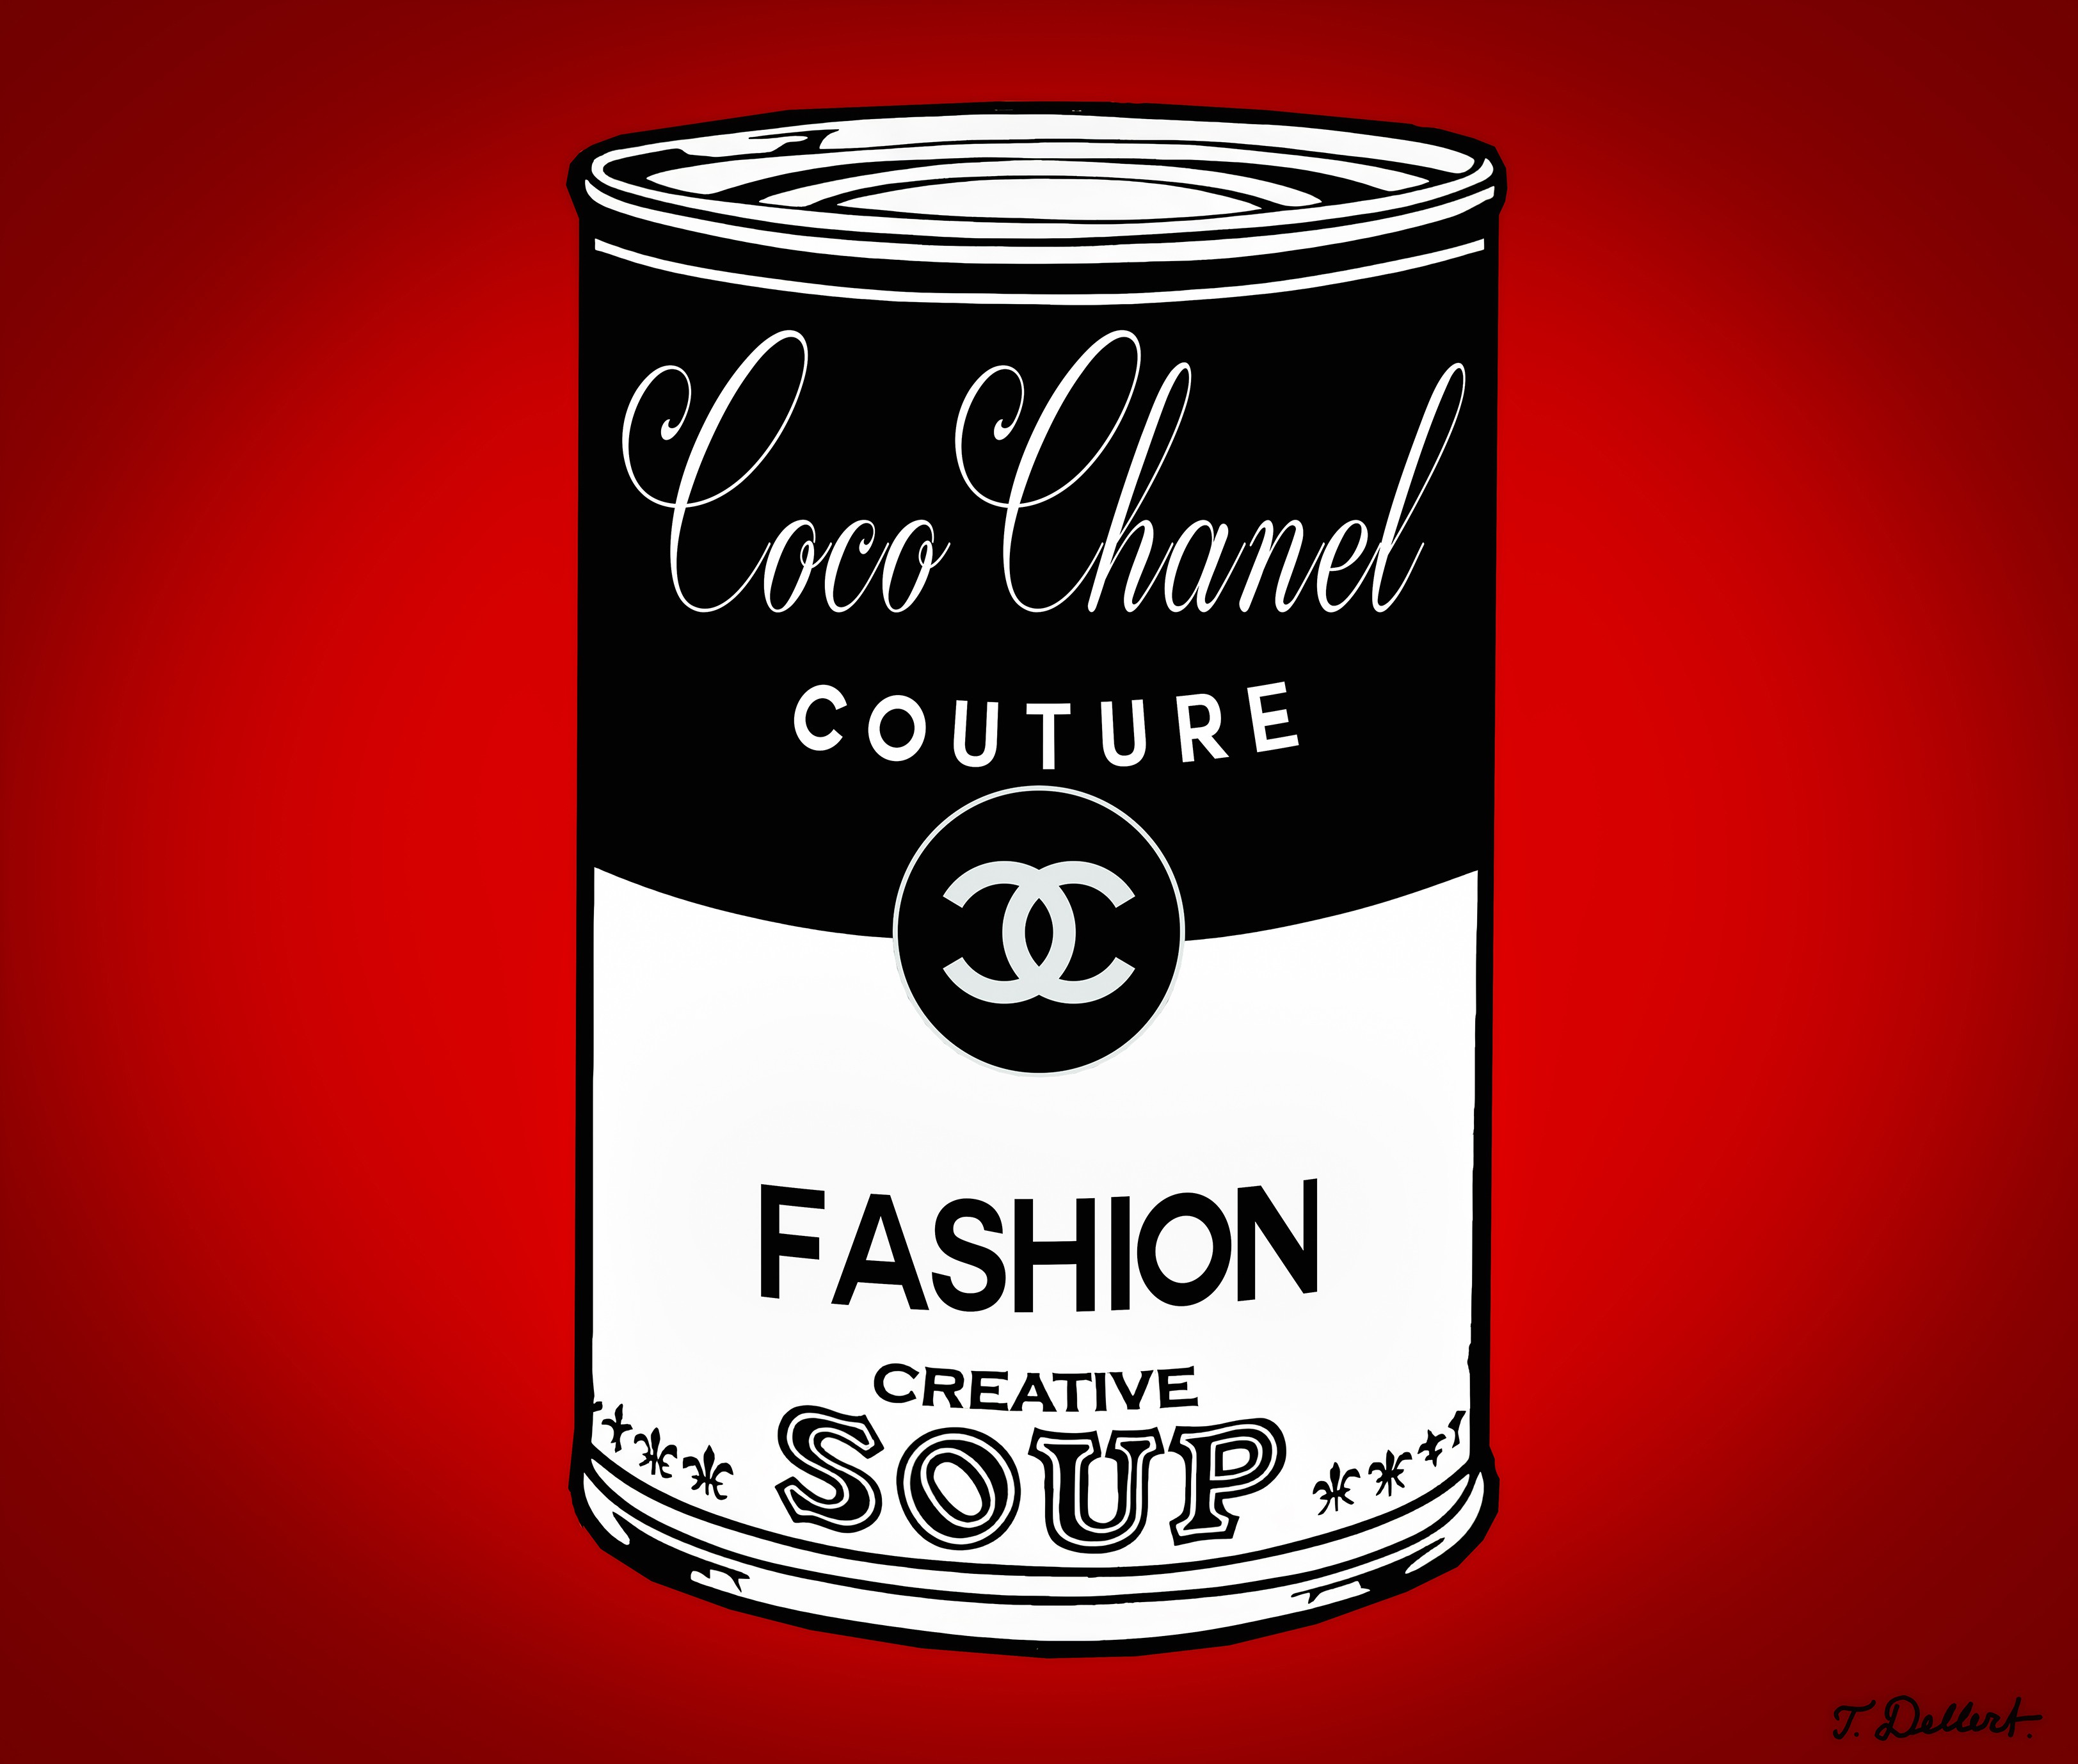 ▷ Chanel fashion Soup Can (after Andy Warhol) by Thomas Dellert